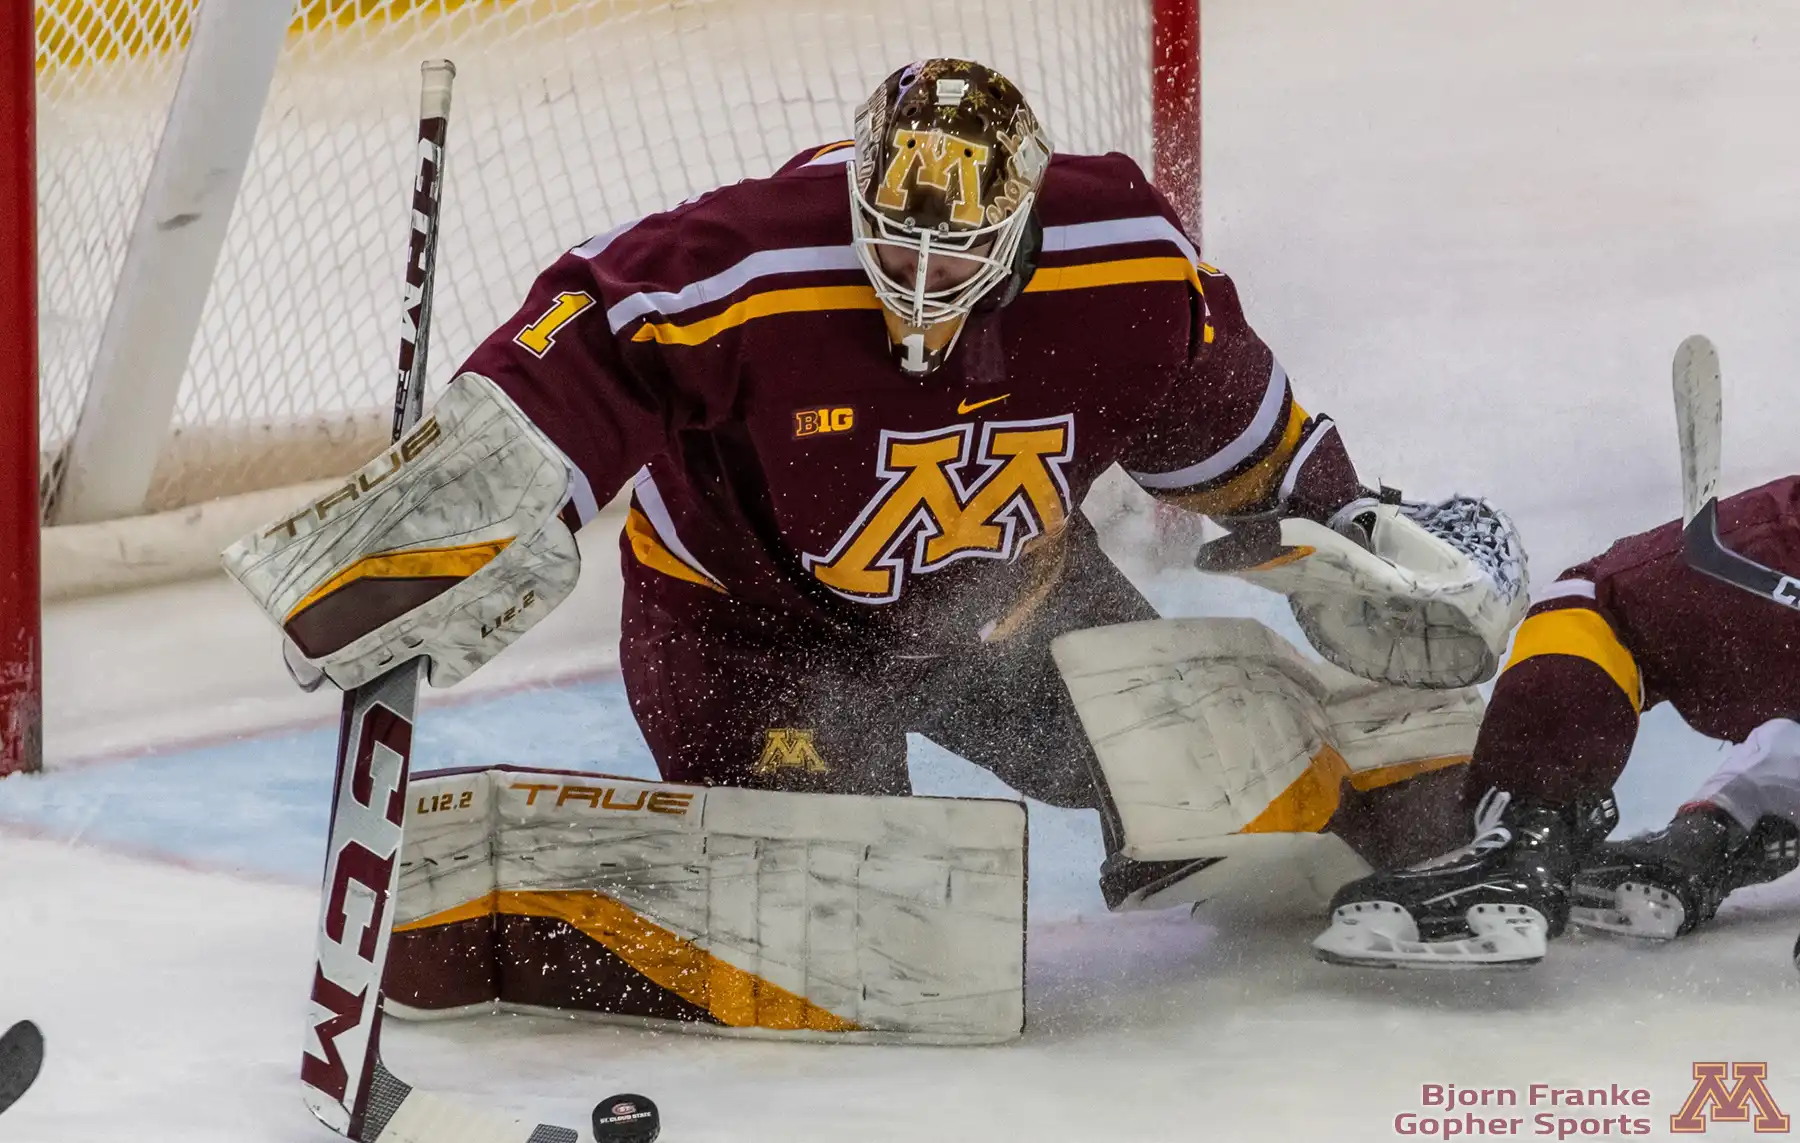 Justen Close makes a save. Photo by Bjorn Franke, Gopher Sports